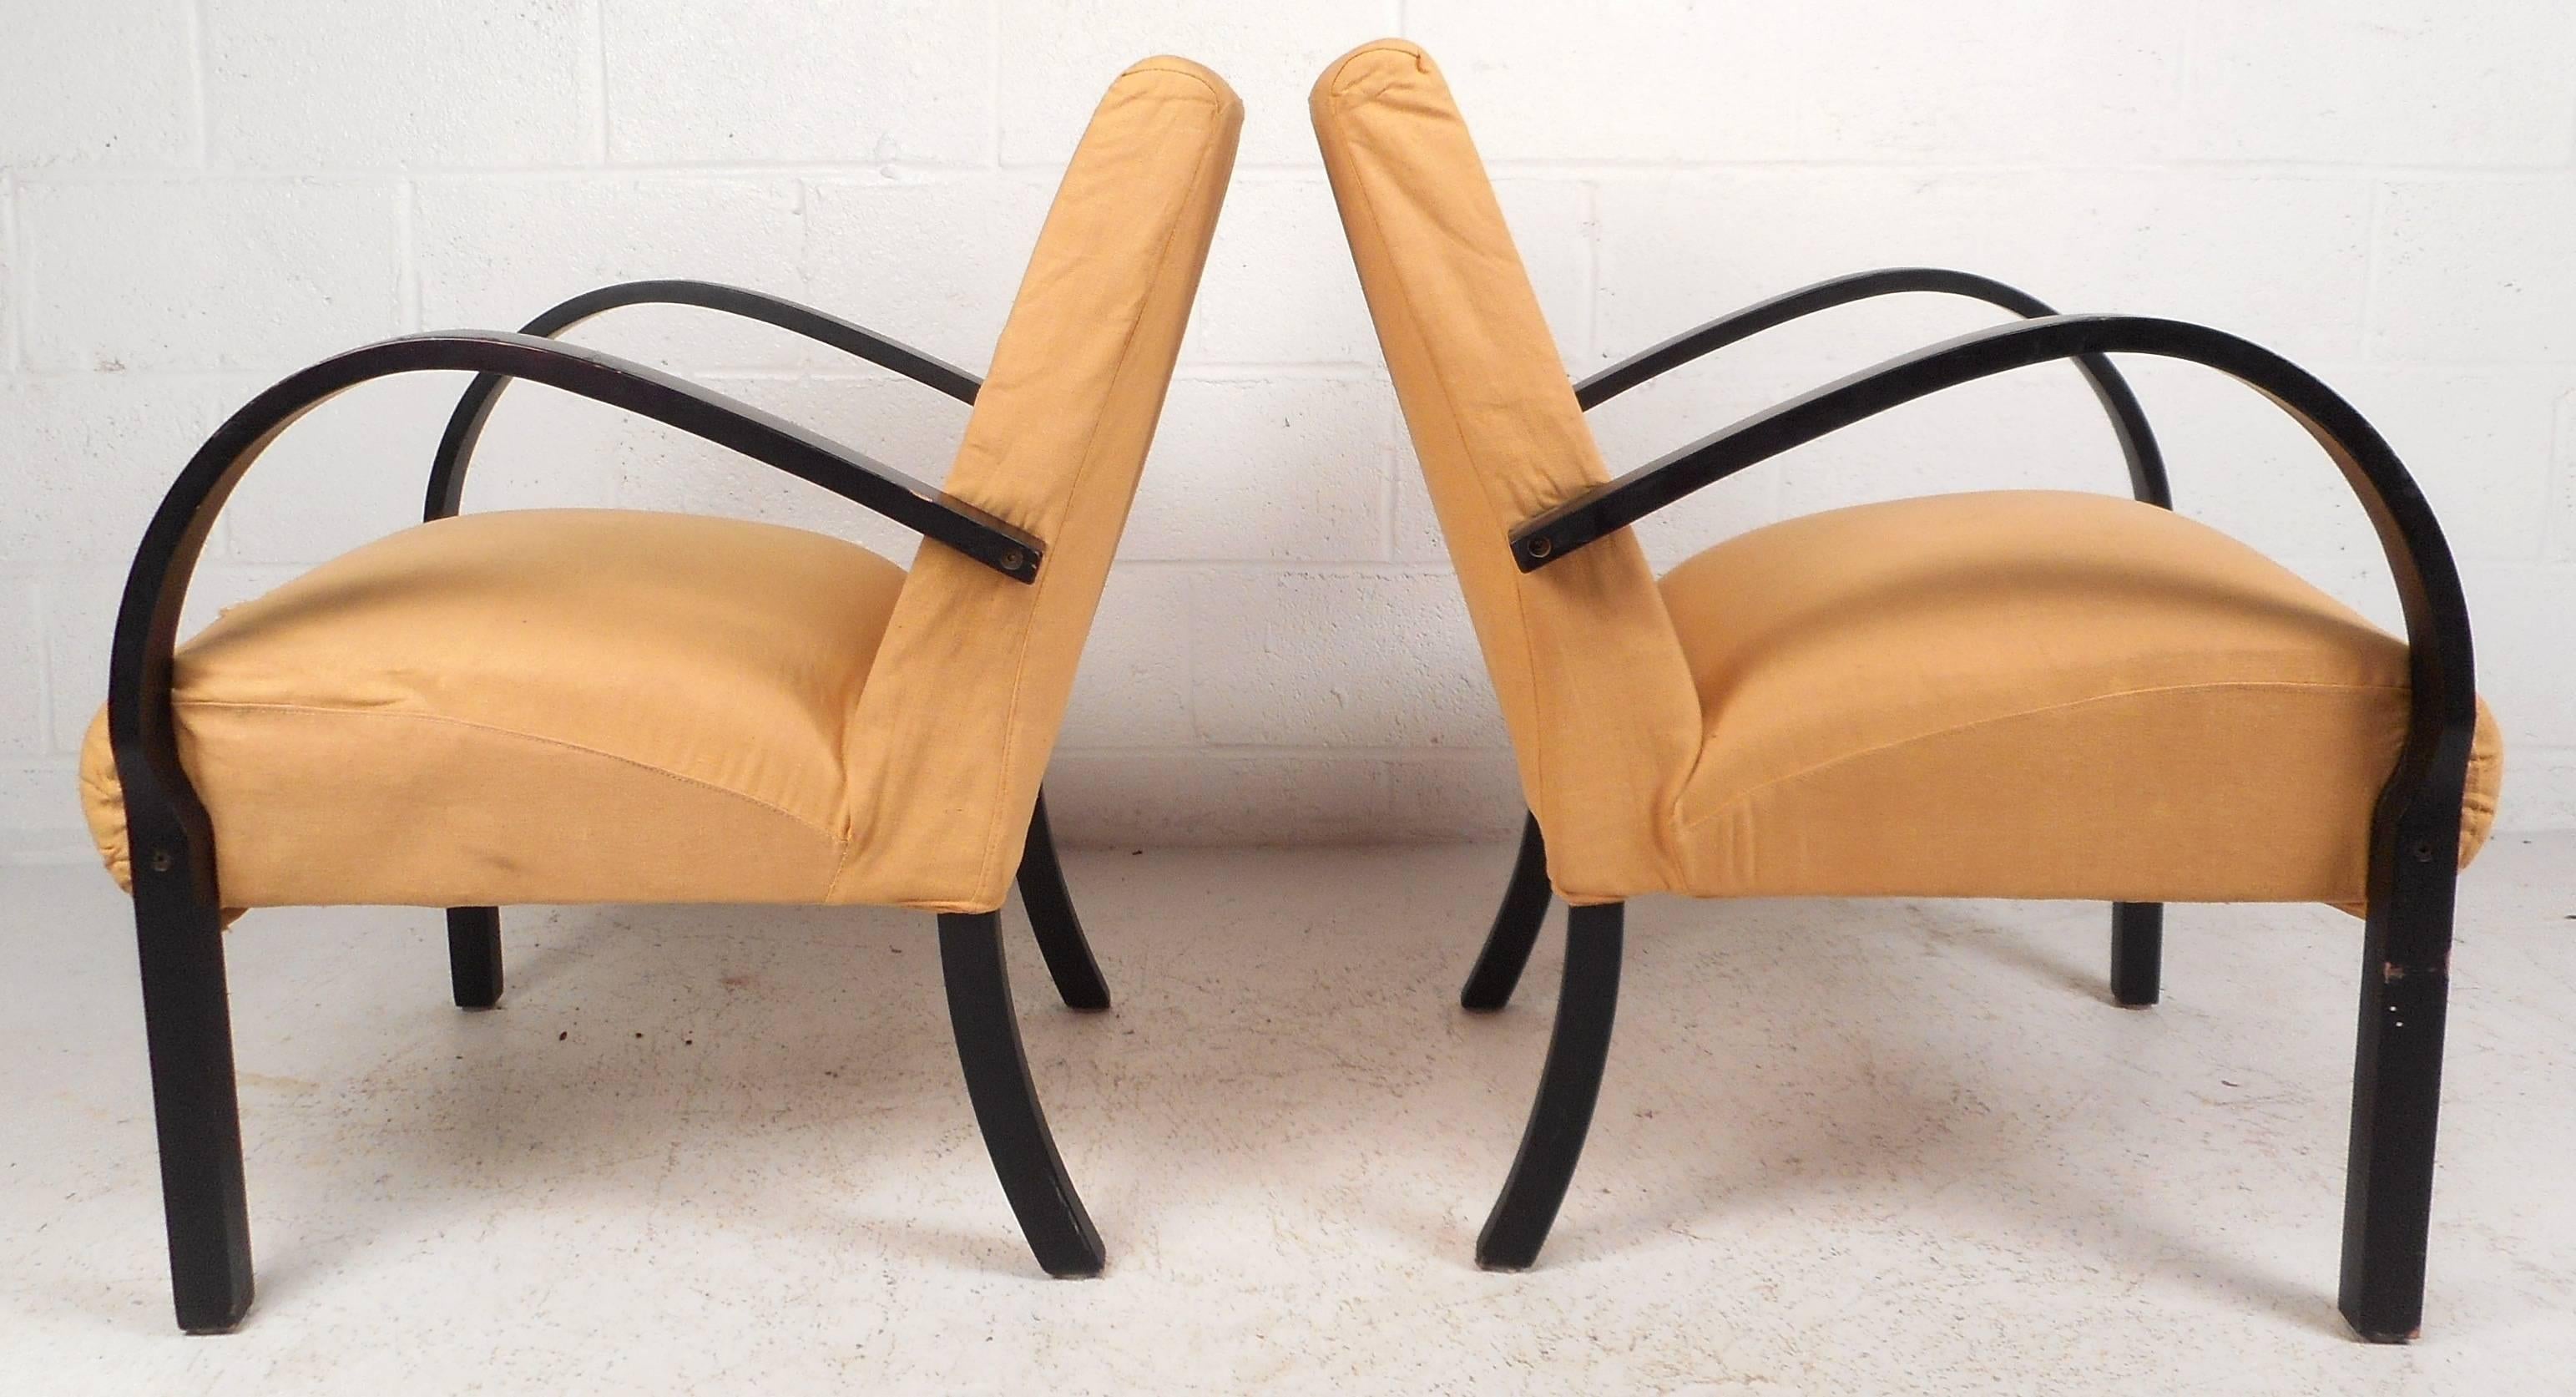 used chairs